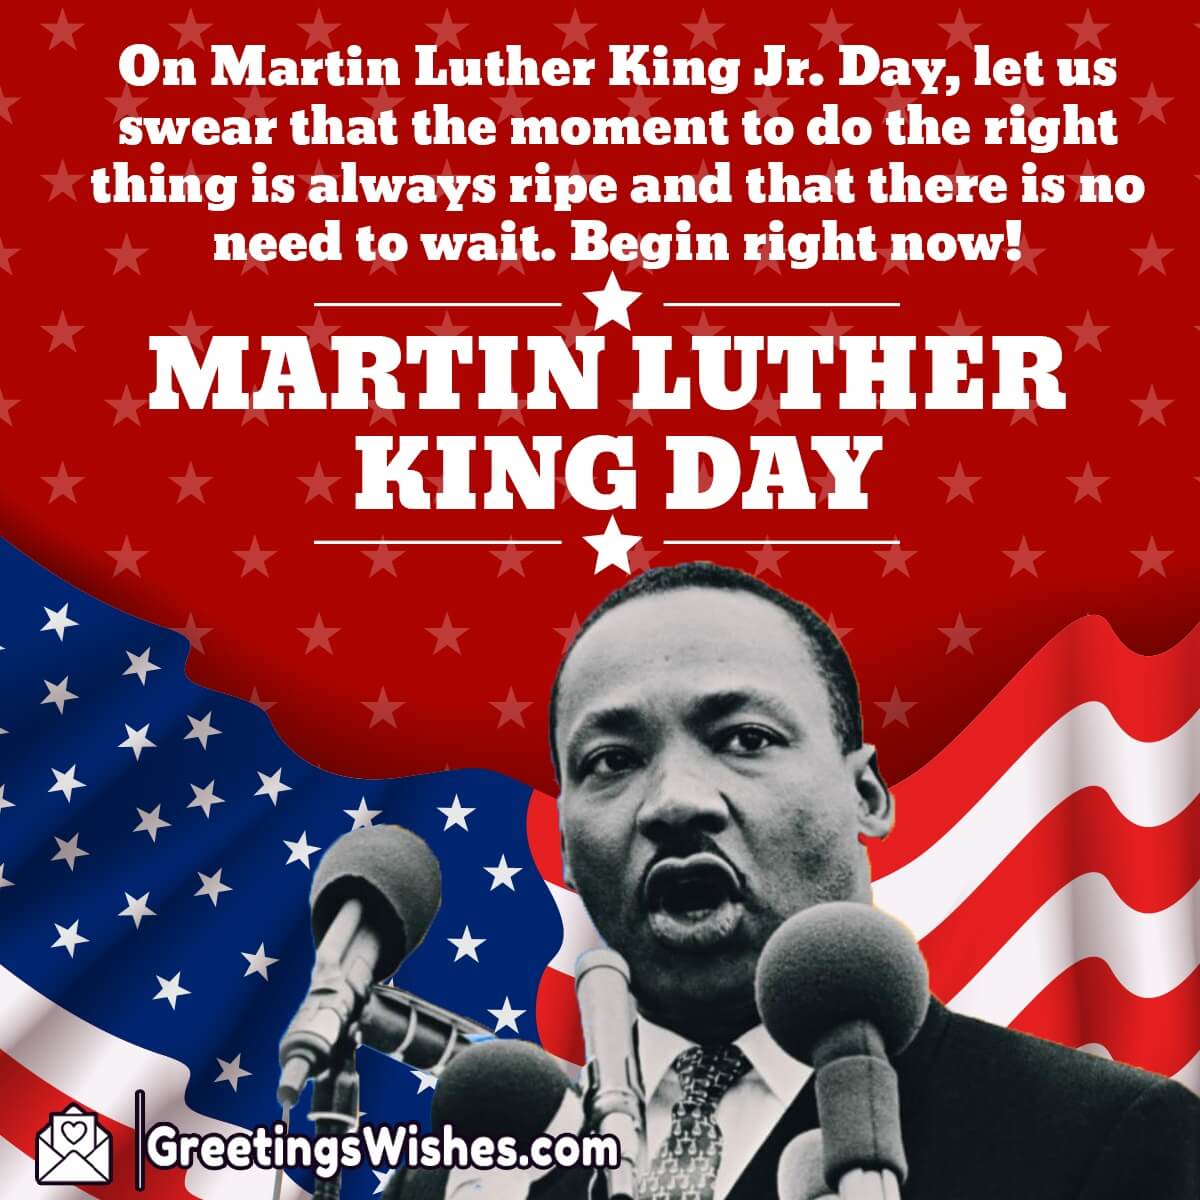 Martin Luther King Jr Day Wishes Messages (17th January) - Greetings Wishes